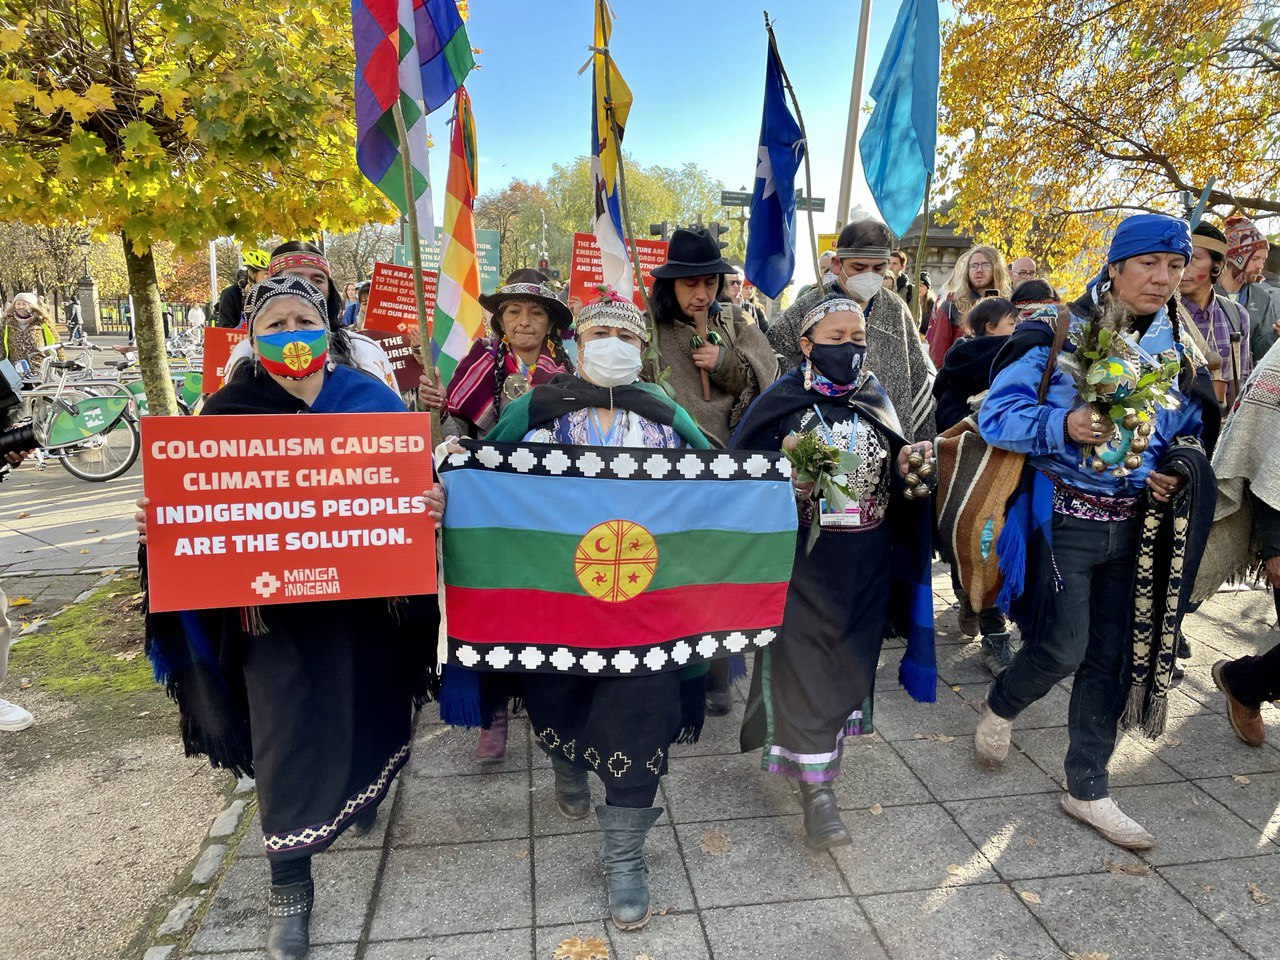 Indigenous people in beautiful dress hold banners and march towards camera.